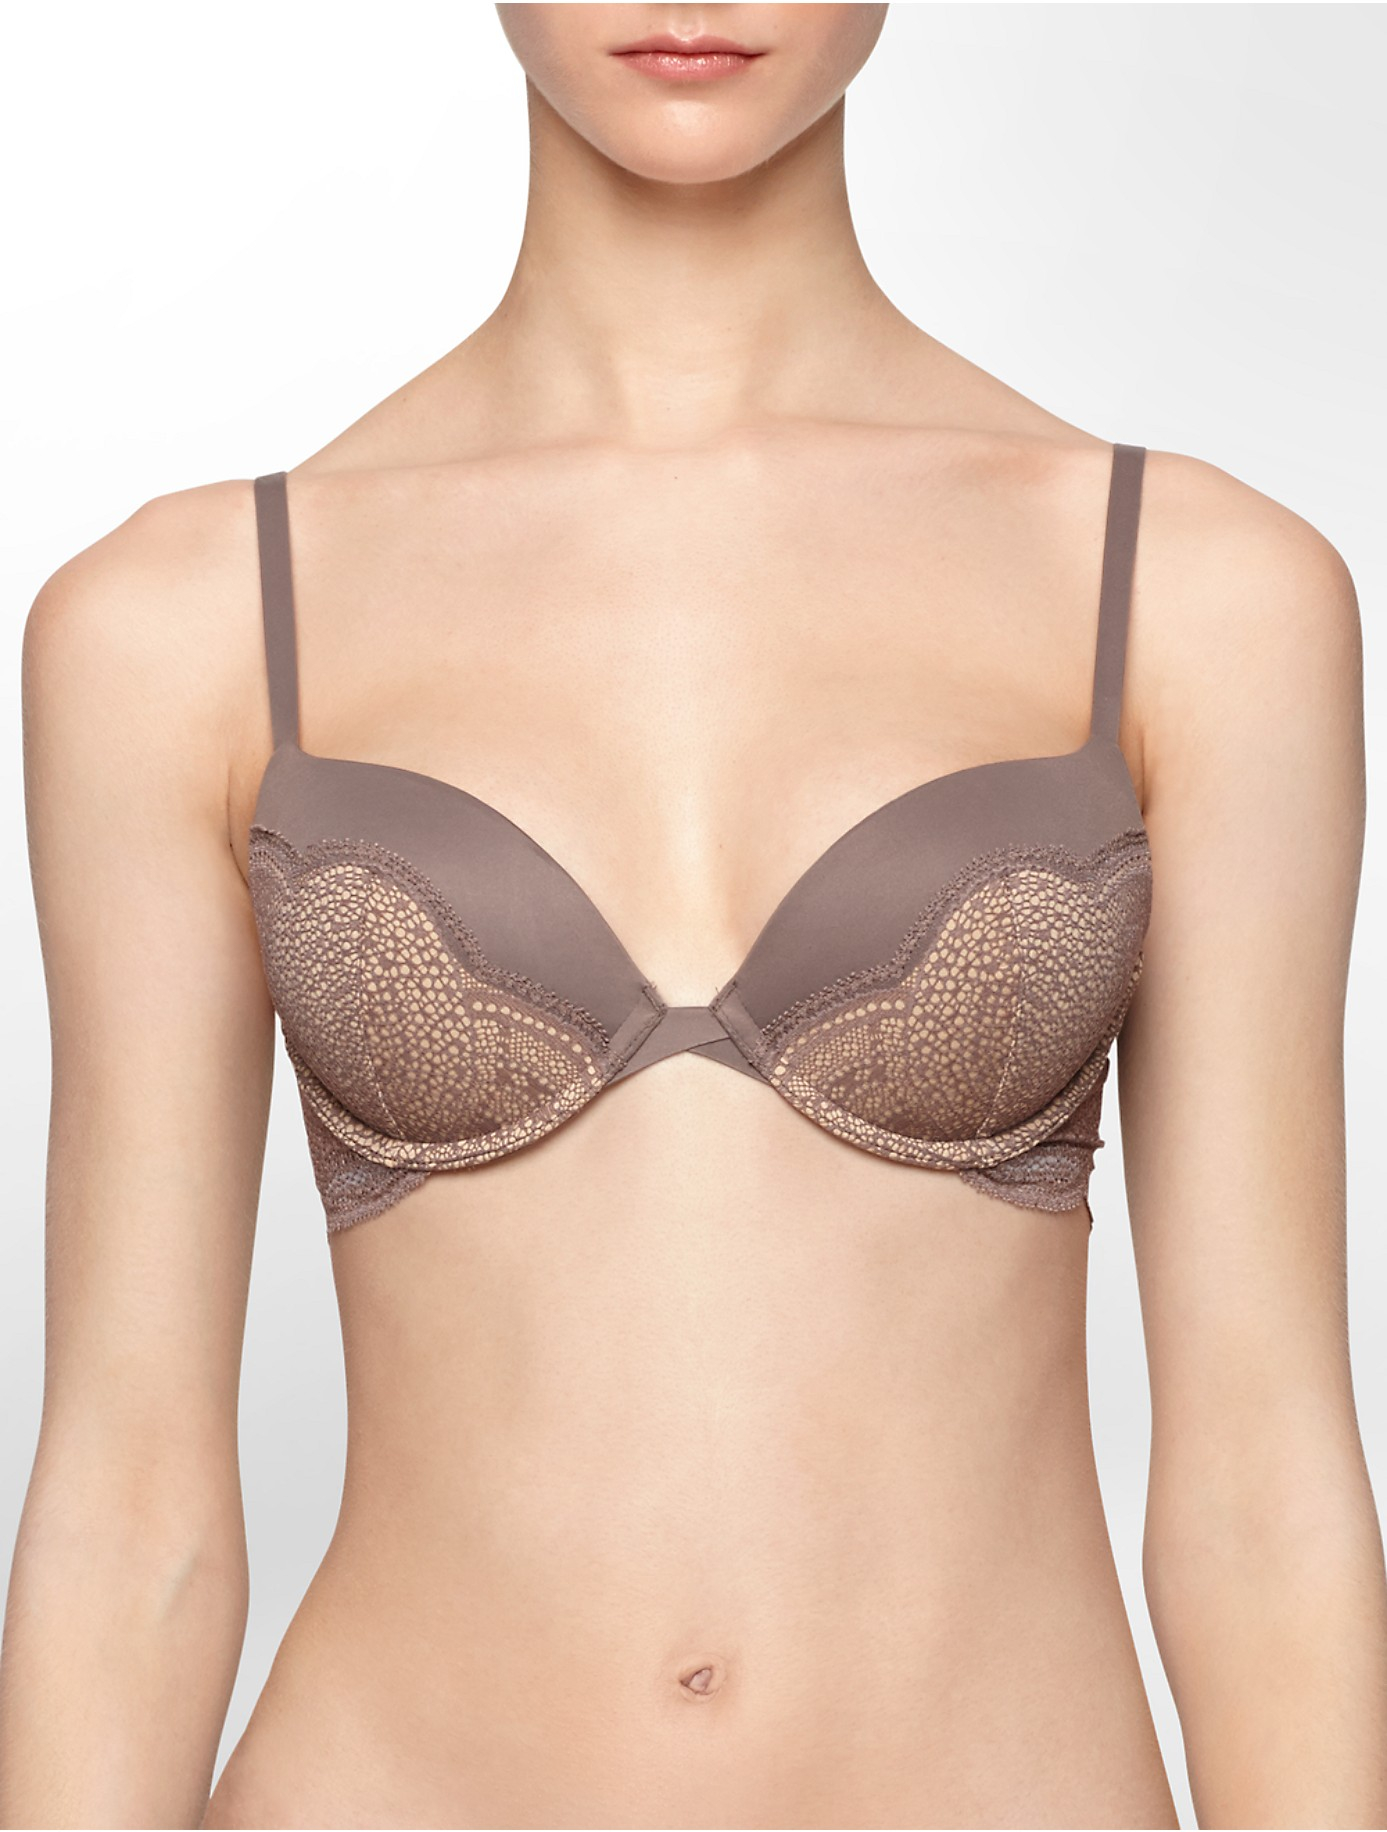 Calvin Klein Underwear Perfectly Fit Lace Push-up Bra in Smoke (Gray) - Lyst